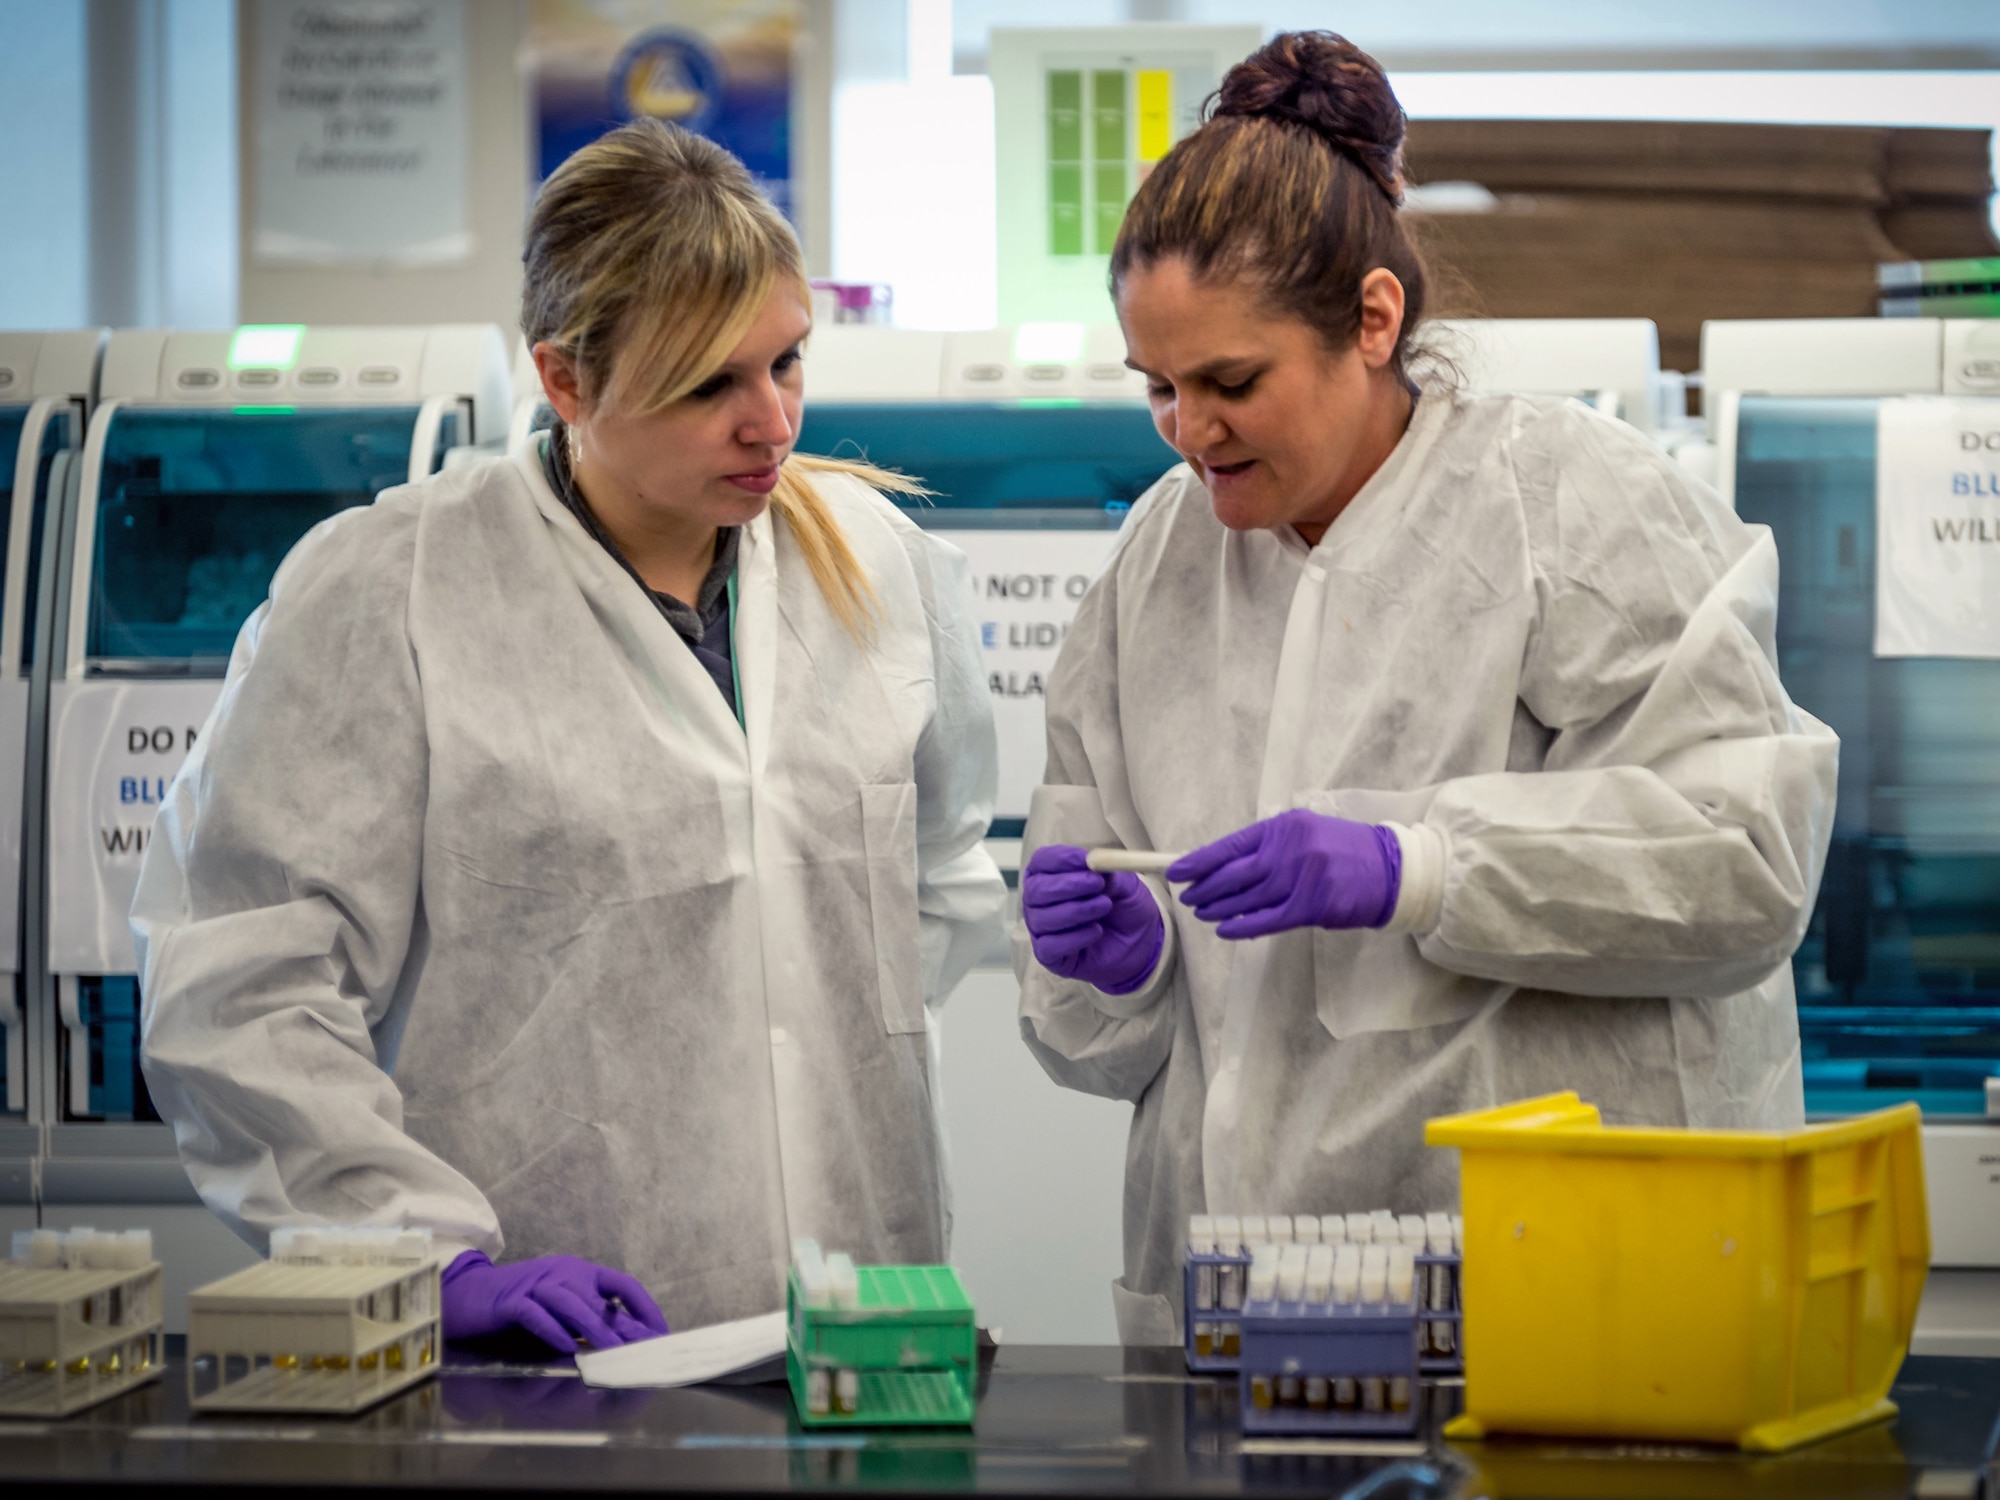 Lindsey White and Tiffany Miracle prepare serology samples to load into an automated analysis system in the immunodiagnostic section of the Epidemiology Laboratory Service, also known as the ‘Epi Lab,’ at the 711th Human Performance Wing’s United States Air Force School of Aerospace Medicine and Public Health at Wright Patterson AFB, Ohio, Jan. 30, 2018. (U.S. Air Force photo by J.M. Eddins Jr.)